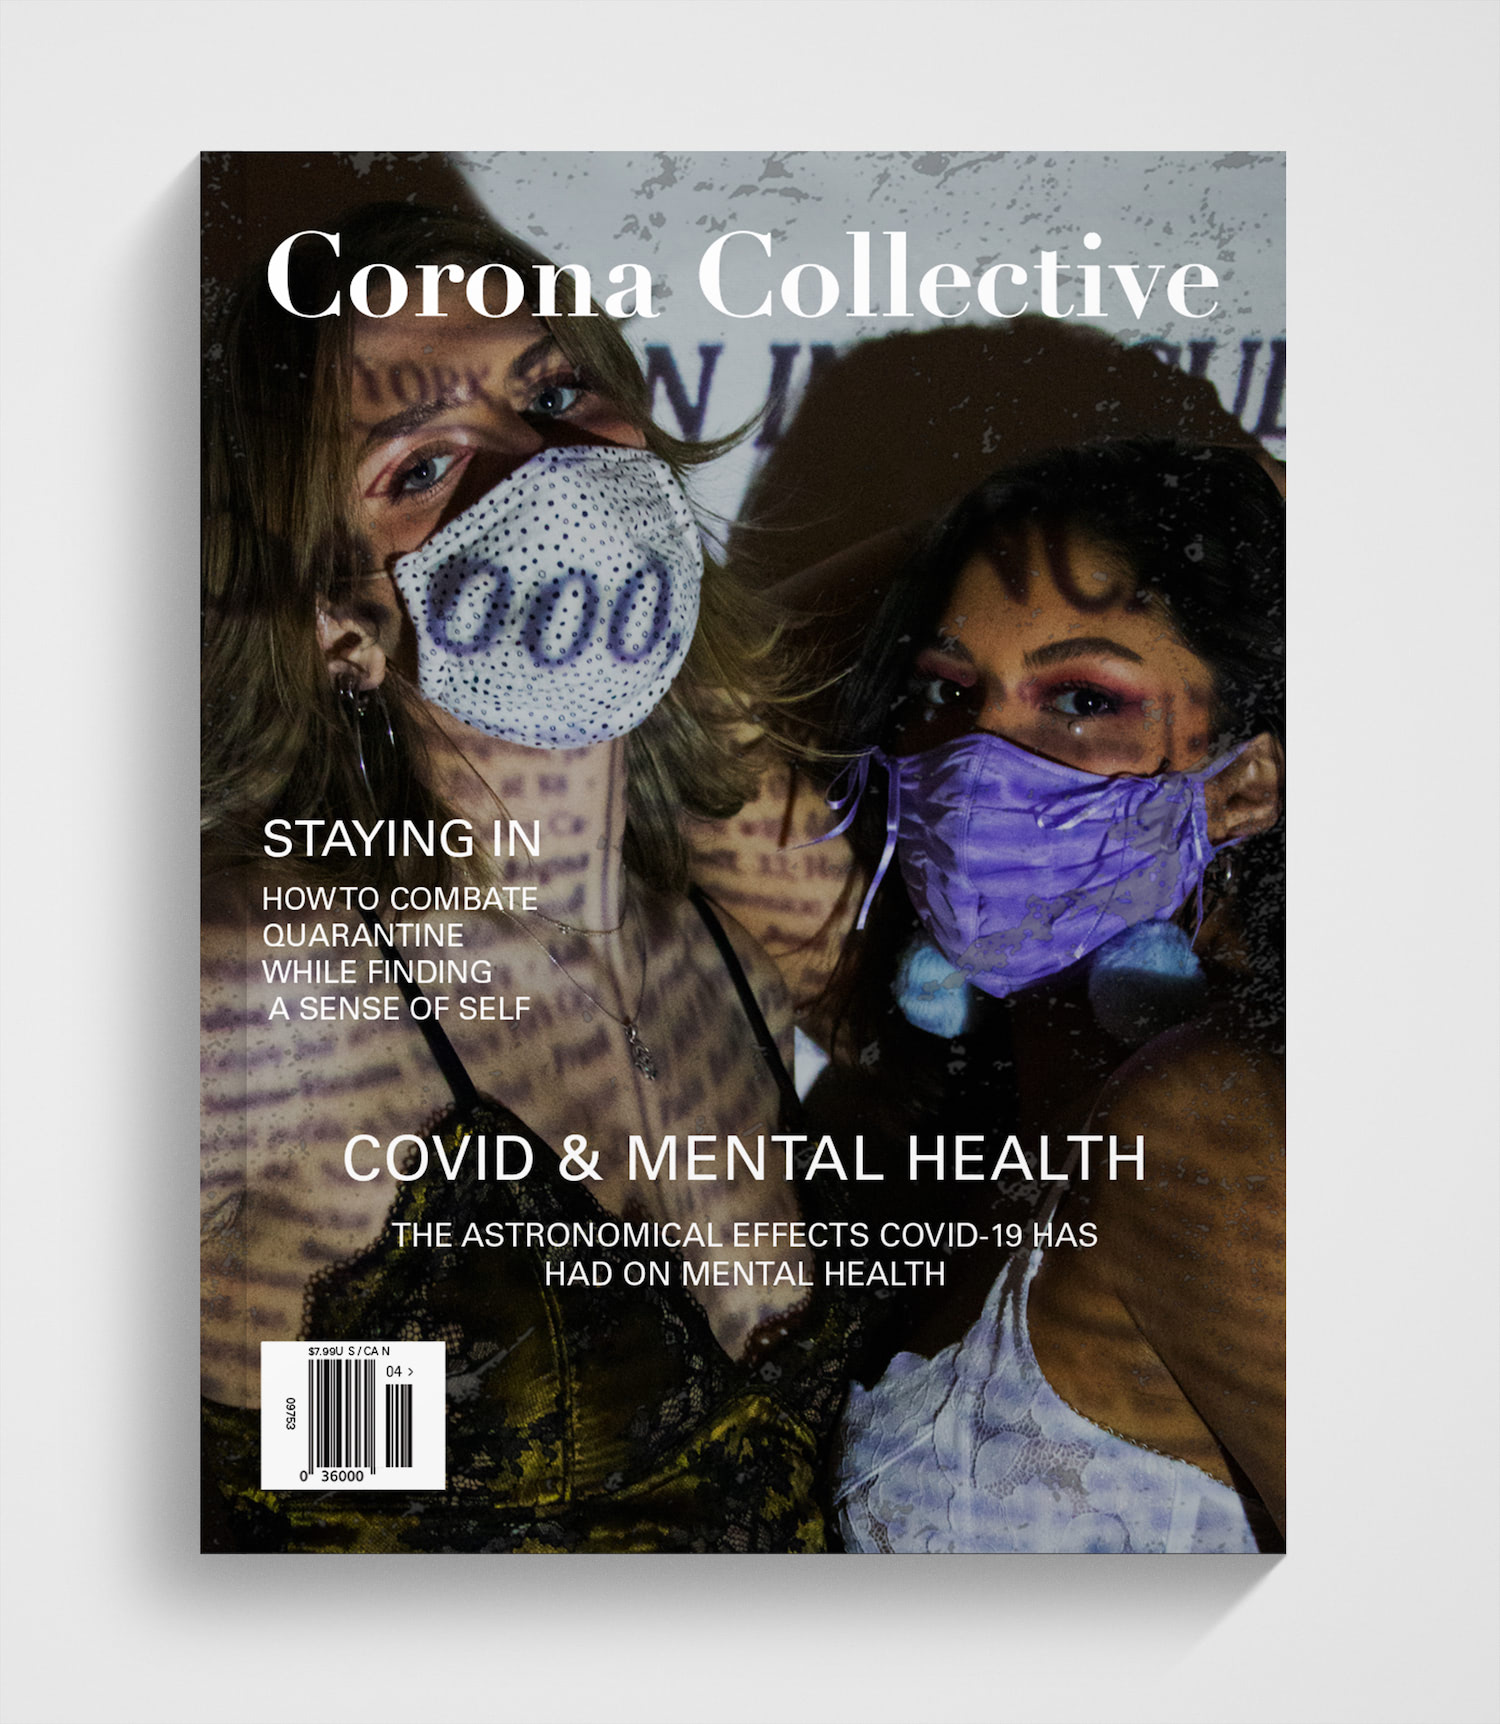 Corona Collective Cover featuring two female models wearing masks while there is a New York Times article projected over both of them. One model has short blonde hair with a light skin tone wearing a white polka-dotted face mask and the other has longer dark brown to black hair and is of a tanner skin tone wearing a purple ruched face mask. The image is editorial and posed but slightly dark and moody.